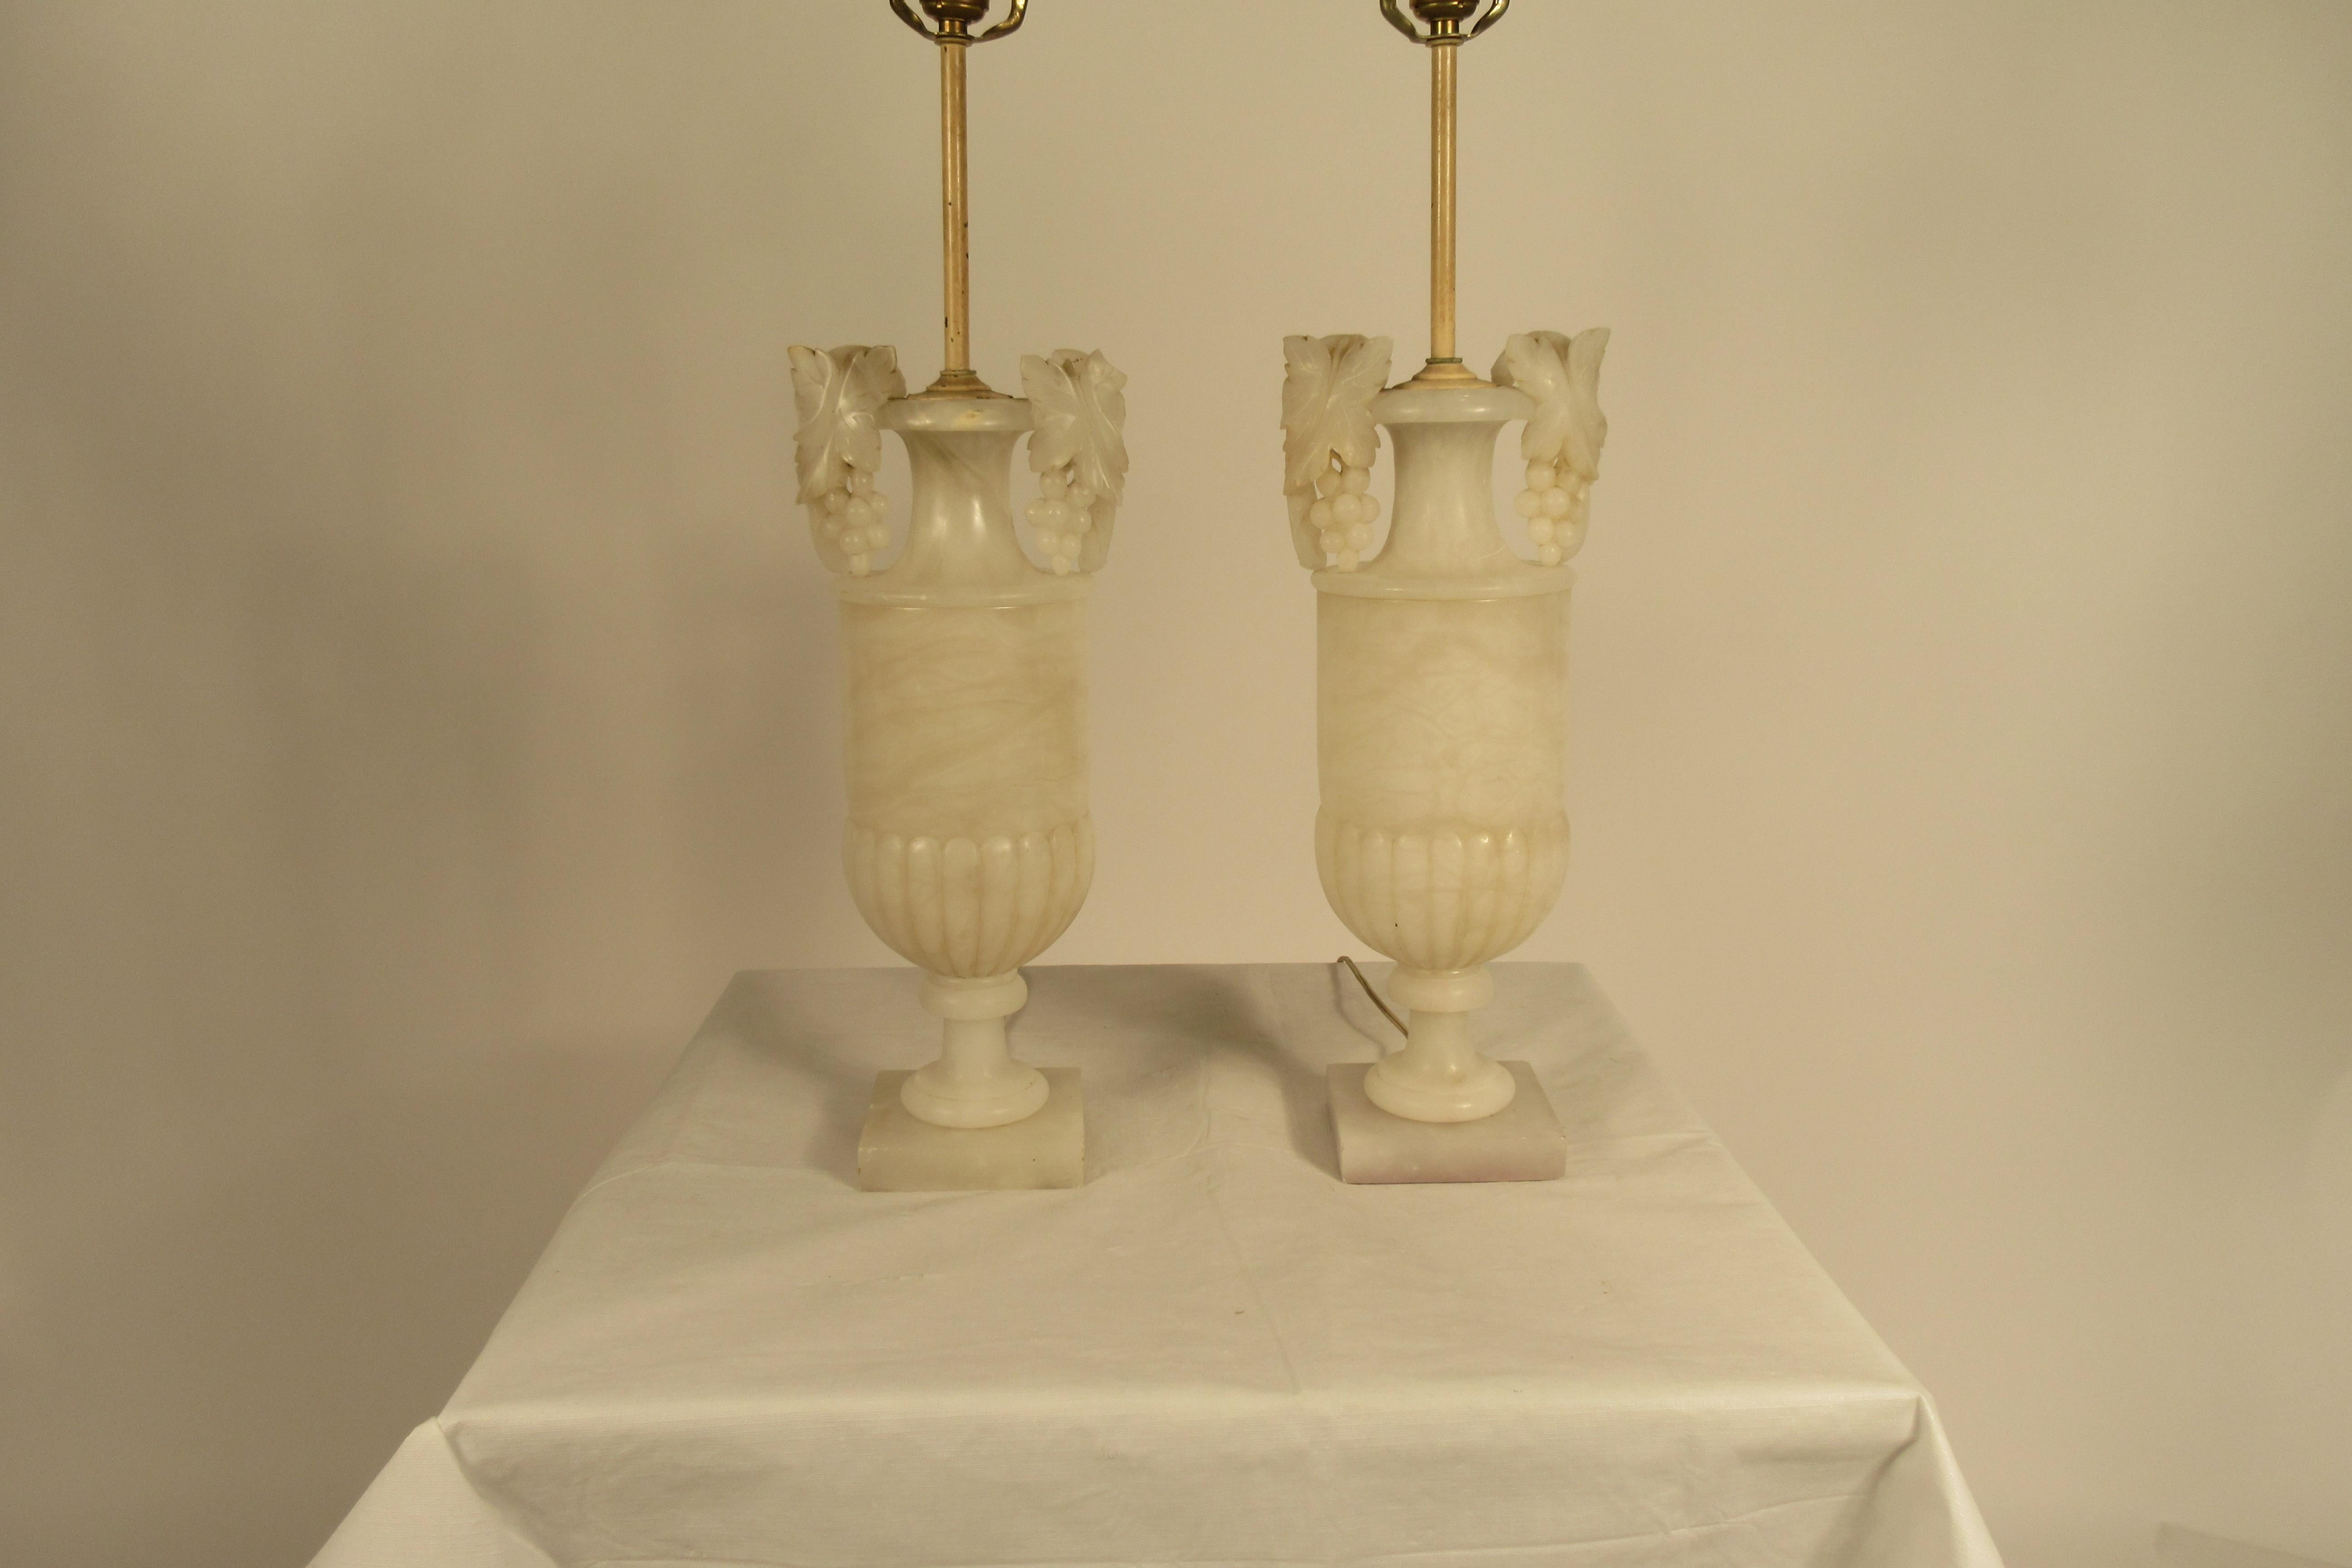 Pair of 1940s carved alabaster lamps with grape handles.